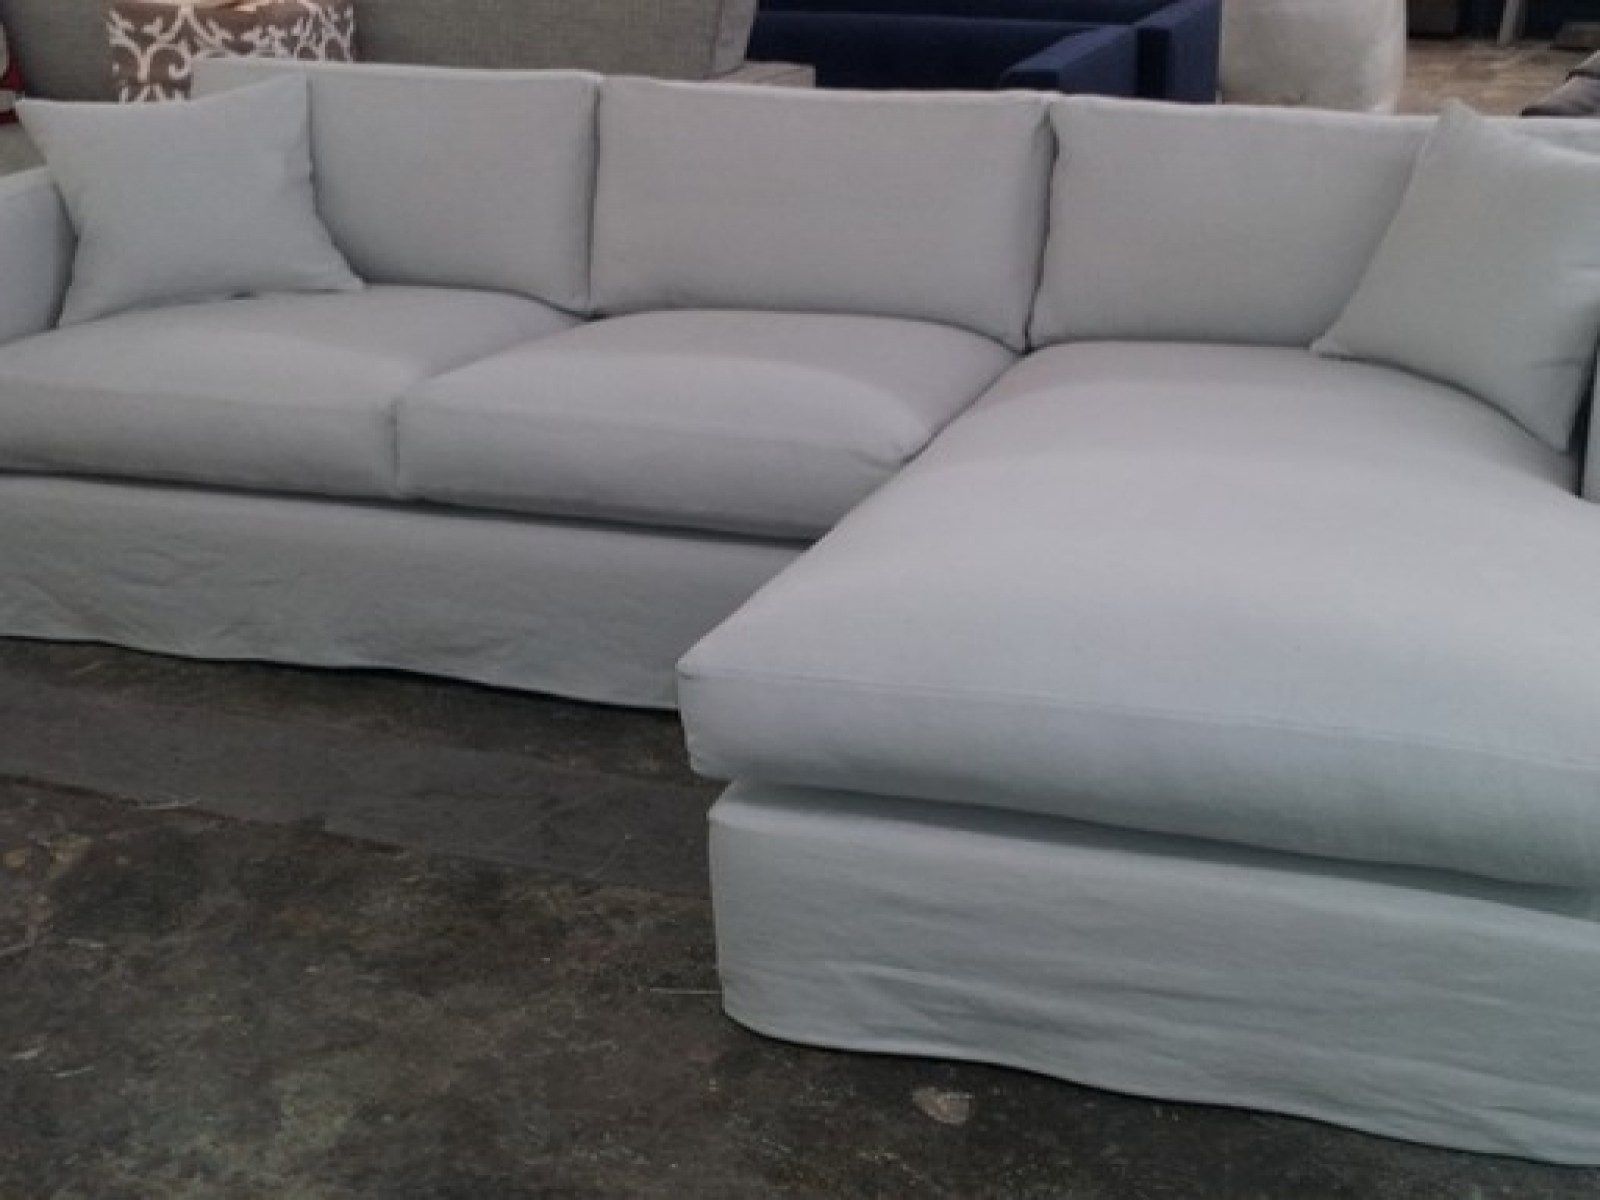 ▻ Sofa : 37 Recliner Sofa Covers Couch Slipcovers Target Slipcovers Throughout Target Sectional Sofas (View 2 of 10)